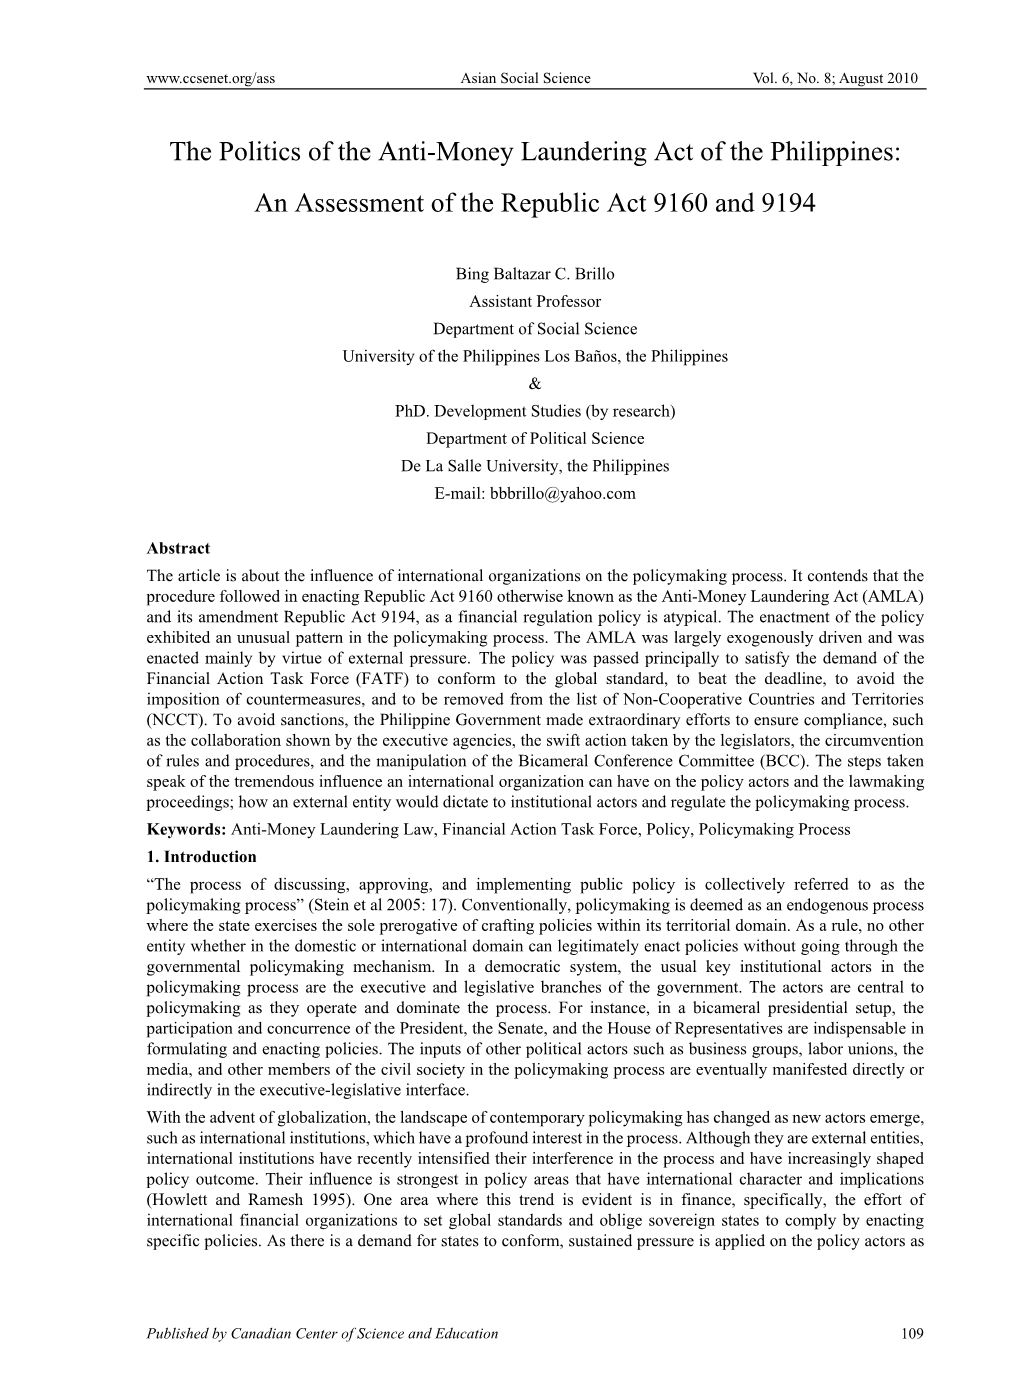 The Politics of the Anti-Money Laundering Act of the Philippines: an Assessment of the Republic Act 9160 and 9194